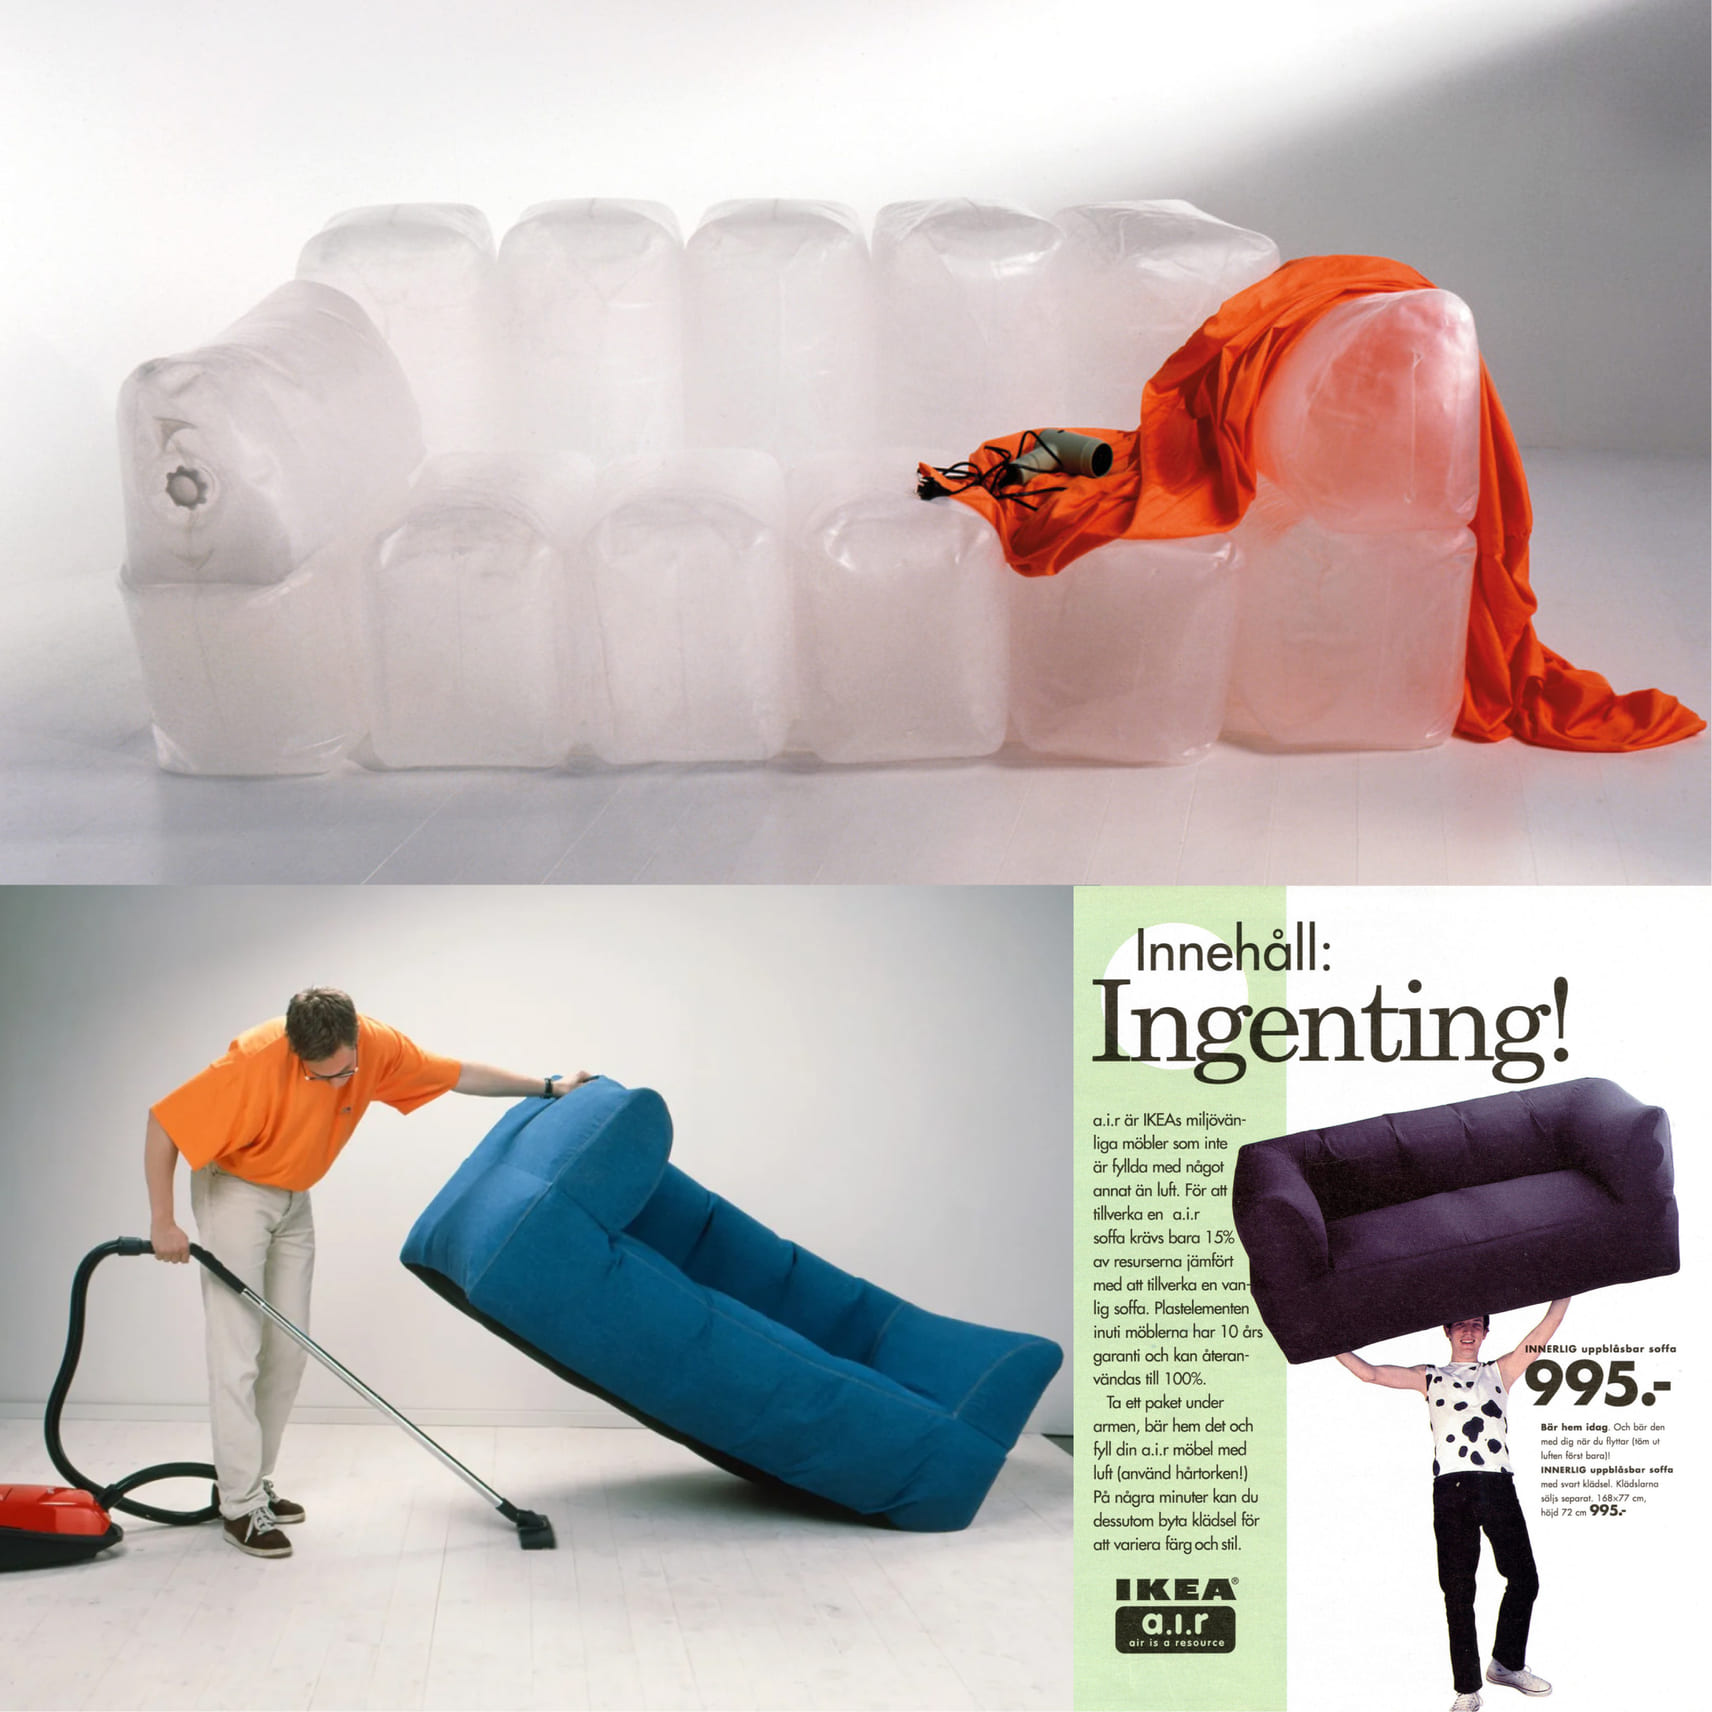 This image is a collage of three photos and some text, all advertising a piece of furniture. In the top left, there is a row of translucent inflatable plastic shaped like a couch with an orange sheet seemingly trapped inside the end bag. Below these images, the left-hand side features a person in an orange shirt and khaki pants using a vacuum under a blue inflatable couch. On the right, there's an advertisement showing a person lifting a deflated blue couch in a bag, with text that includes the price "995.-" and some Swedish text, which indicates that it's a product by IKEA. The text at the top right, “Innehåll: Ingenting!”, translates to "Contents: Nothing!" in English. This appears to be an ad showcasing the ease of storing and setting up an inflatable piece of furniture.